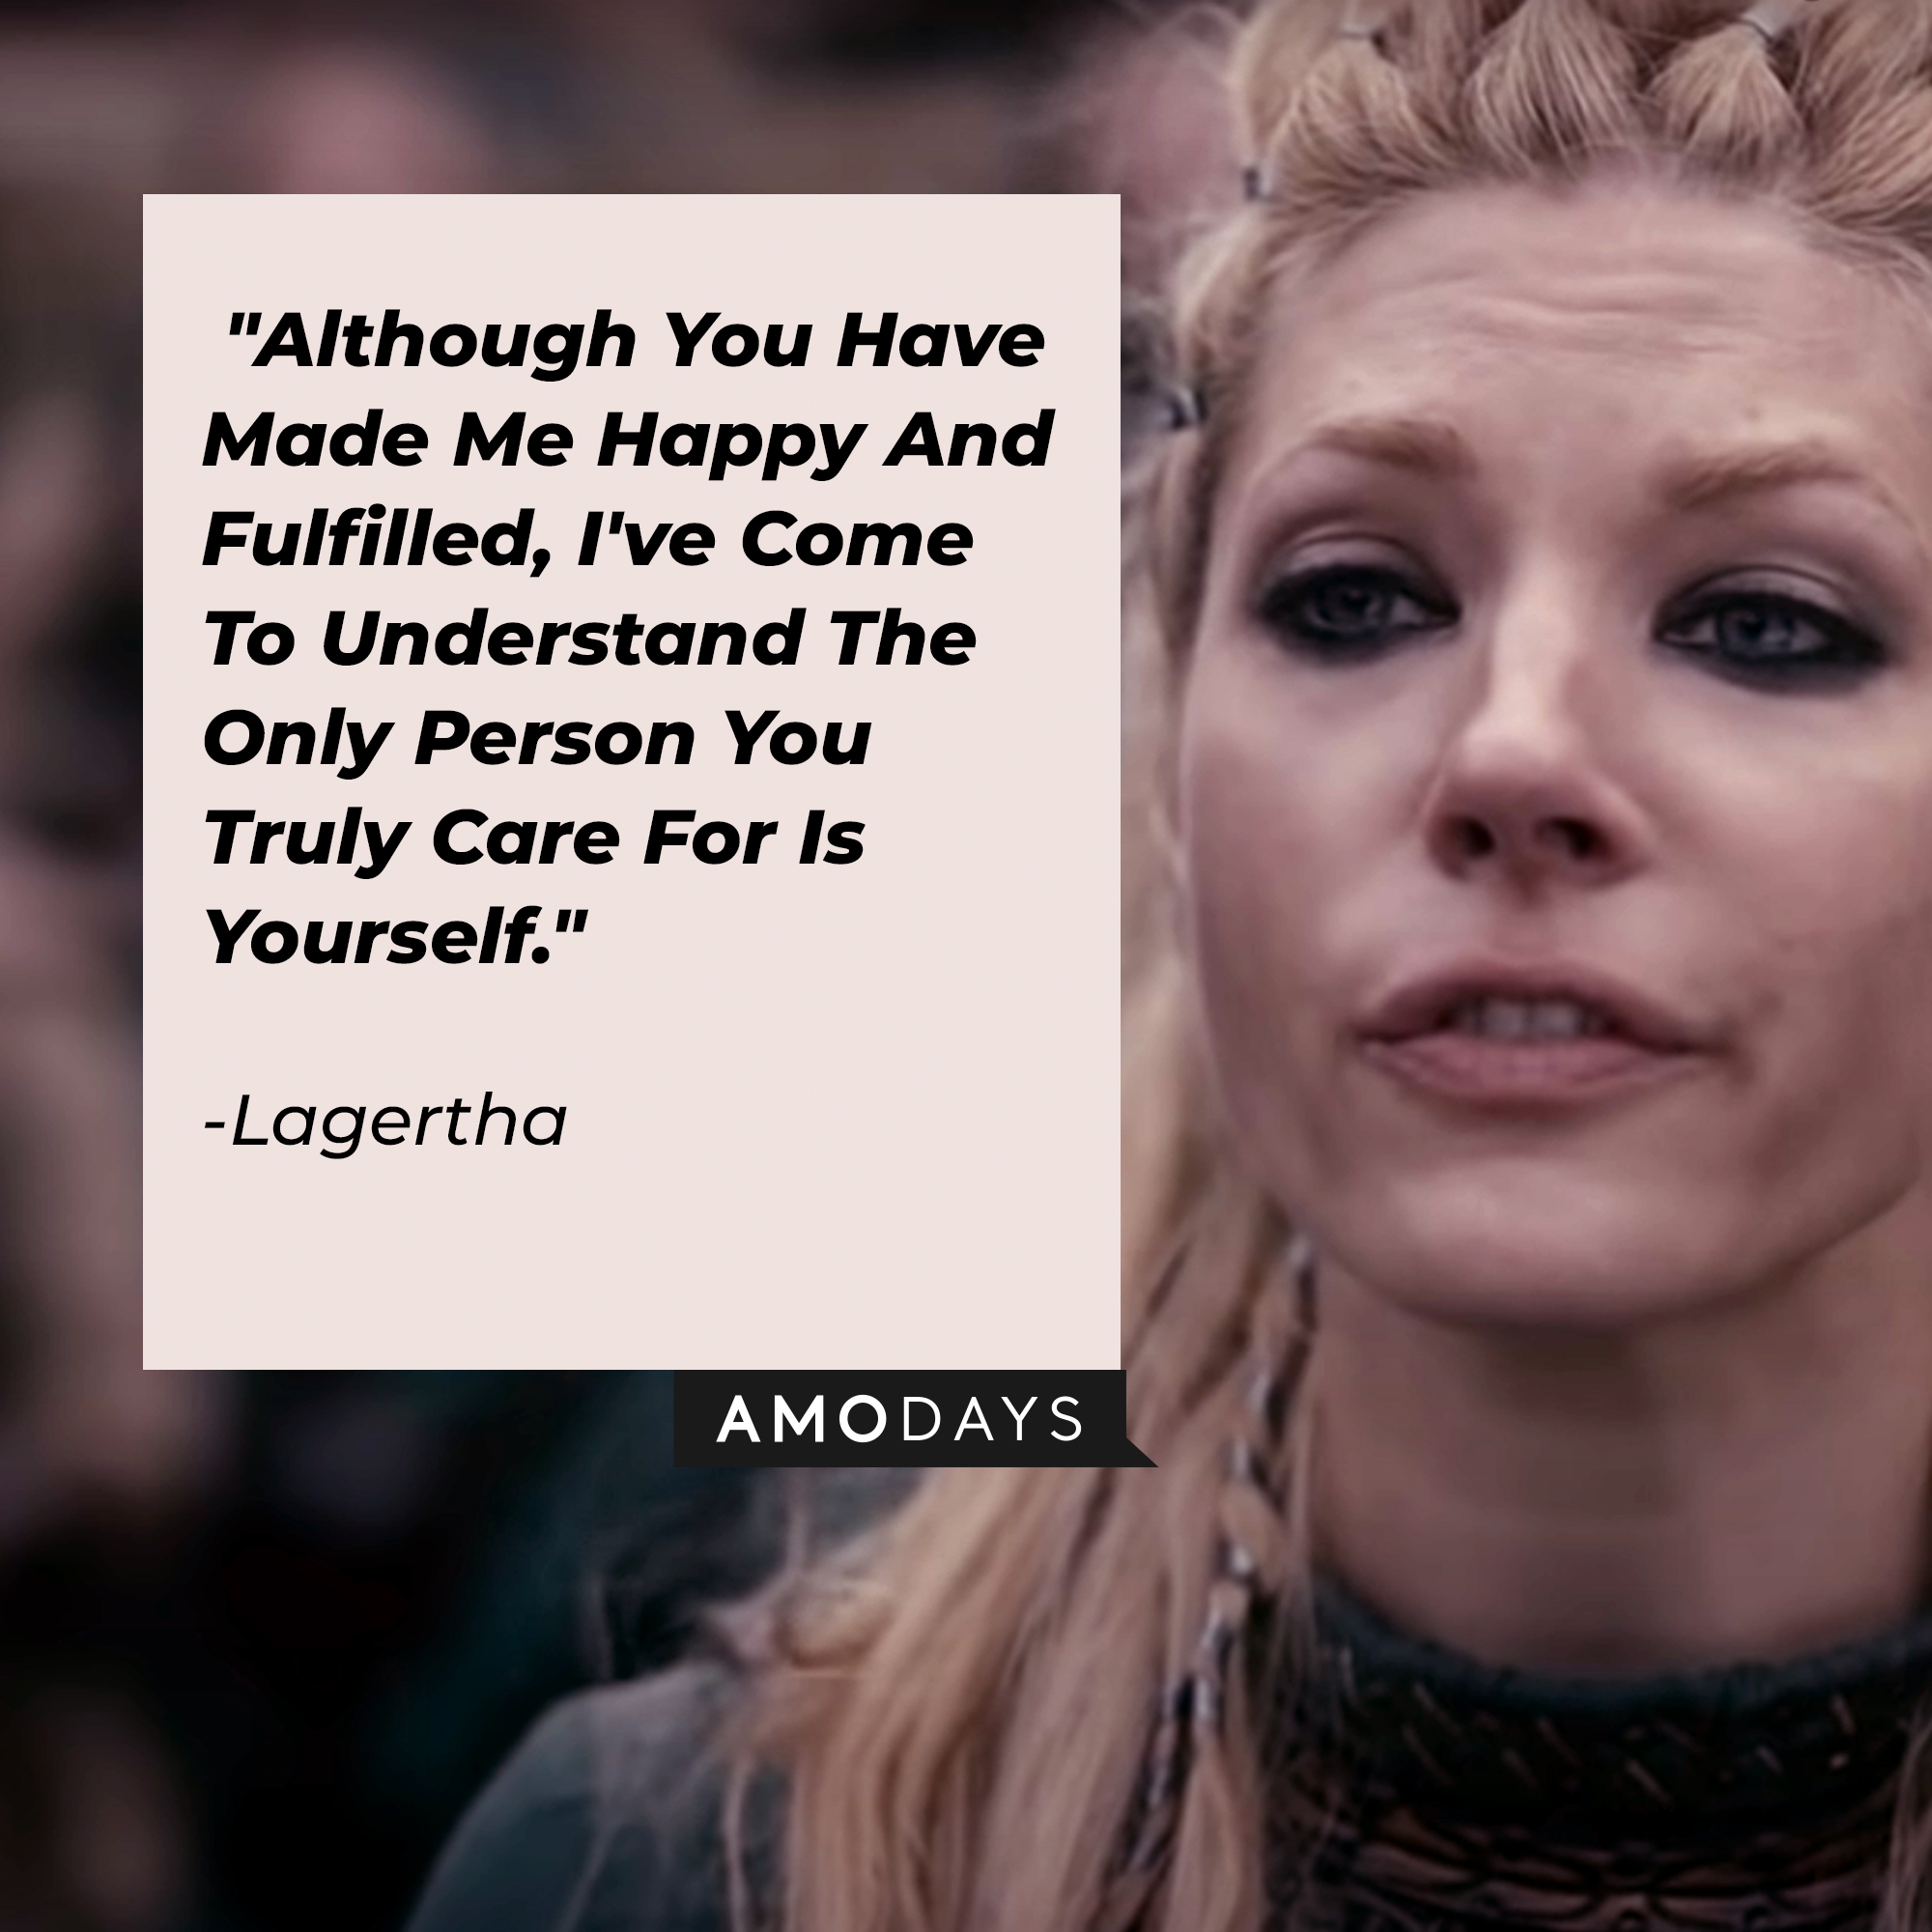 Lagertha's quote: "Although You Have Made Me Happy And Fulfilled, I've Come To Understand The Only Person You Truly Care For Is Yourself." | Source: youtube.com/PrimeVideoUK